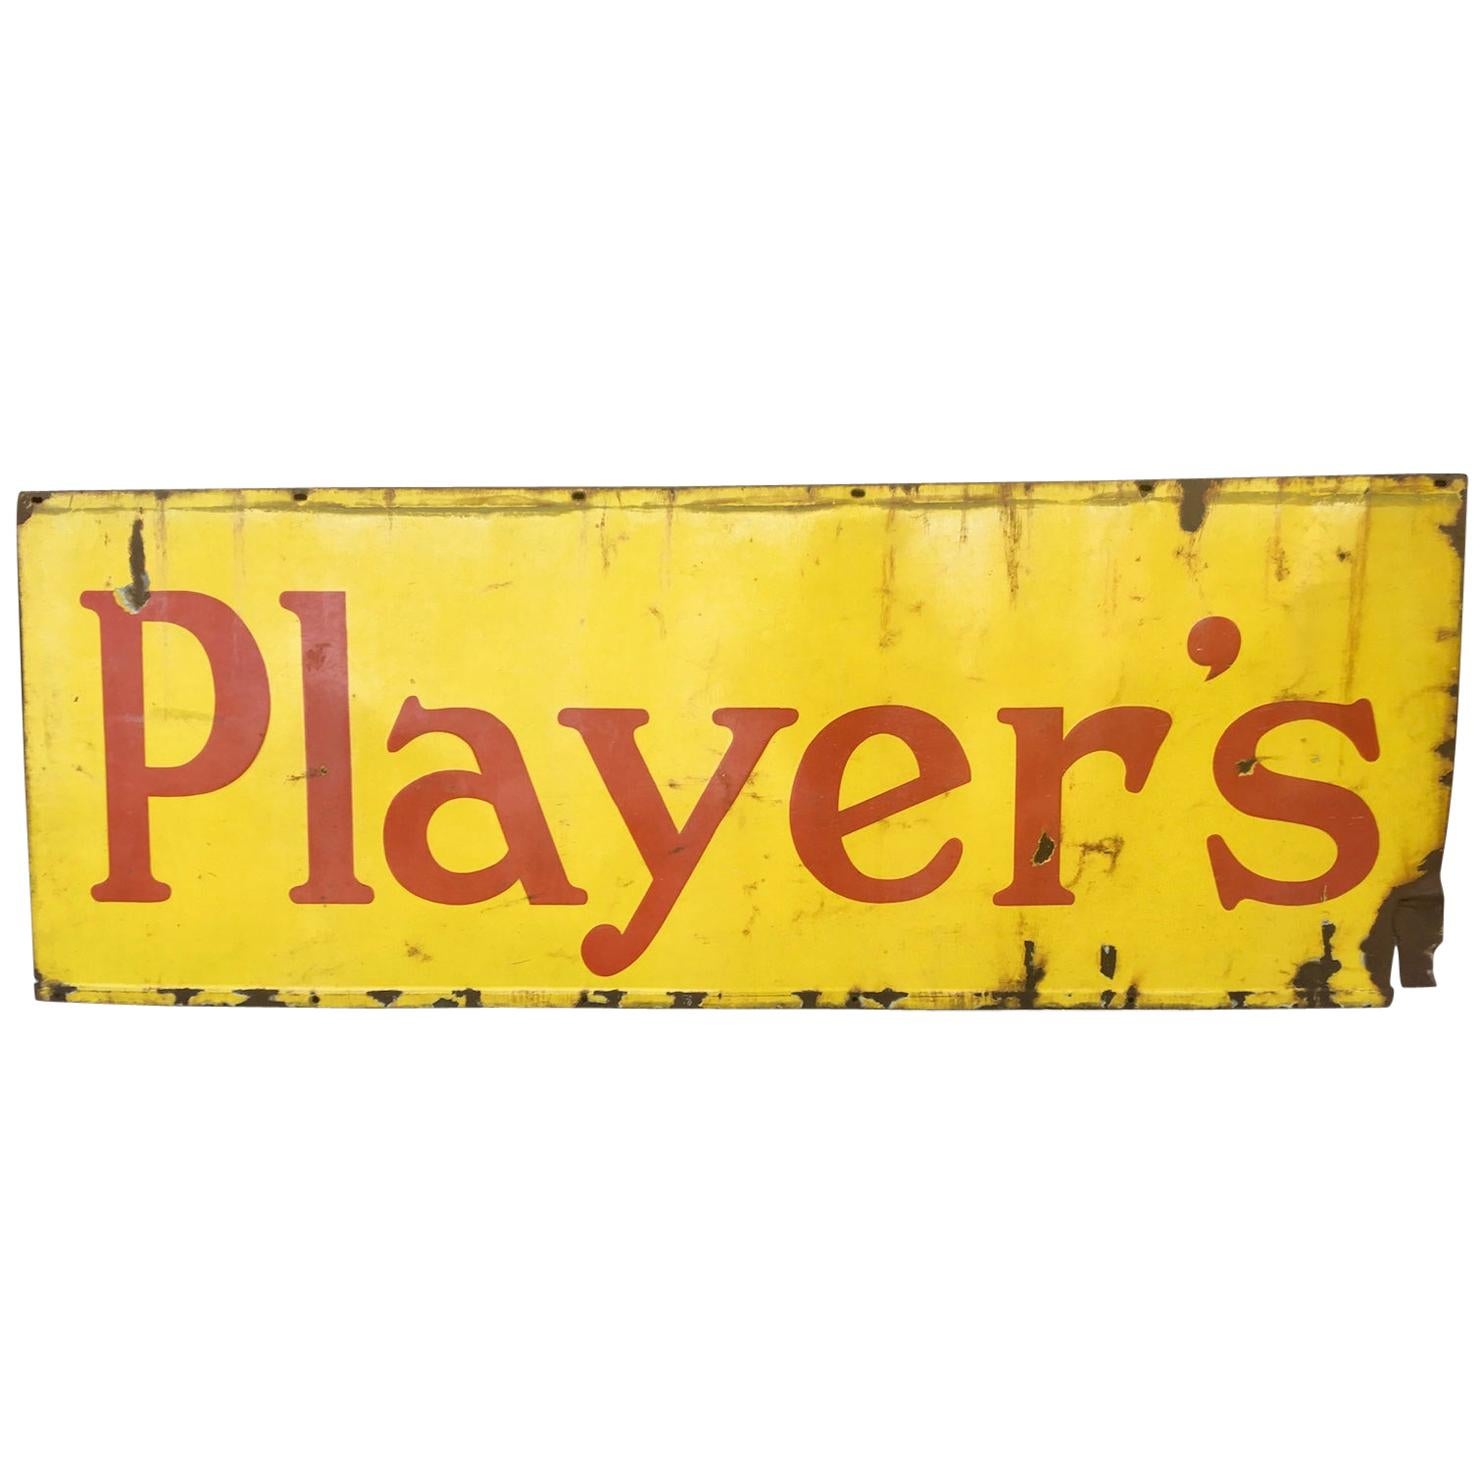 Large Enamel Advertising Sign for Player’s Tobacco, 1950